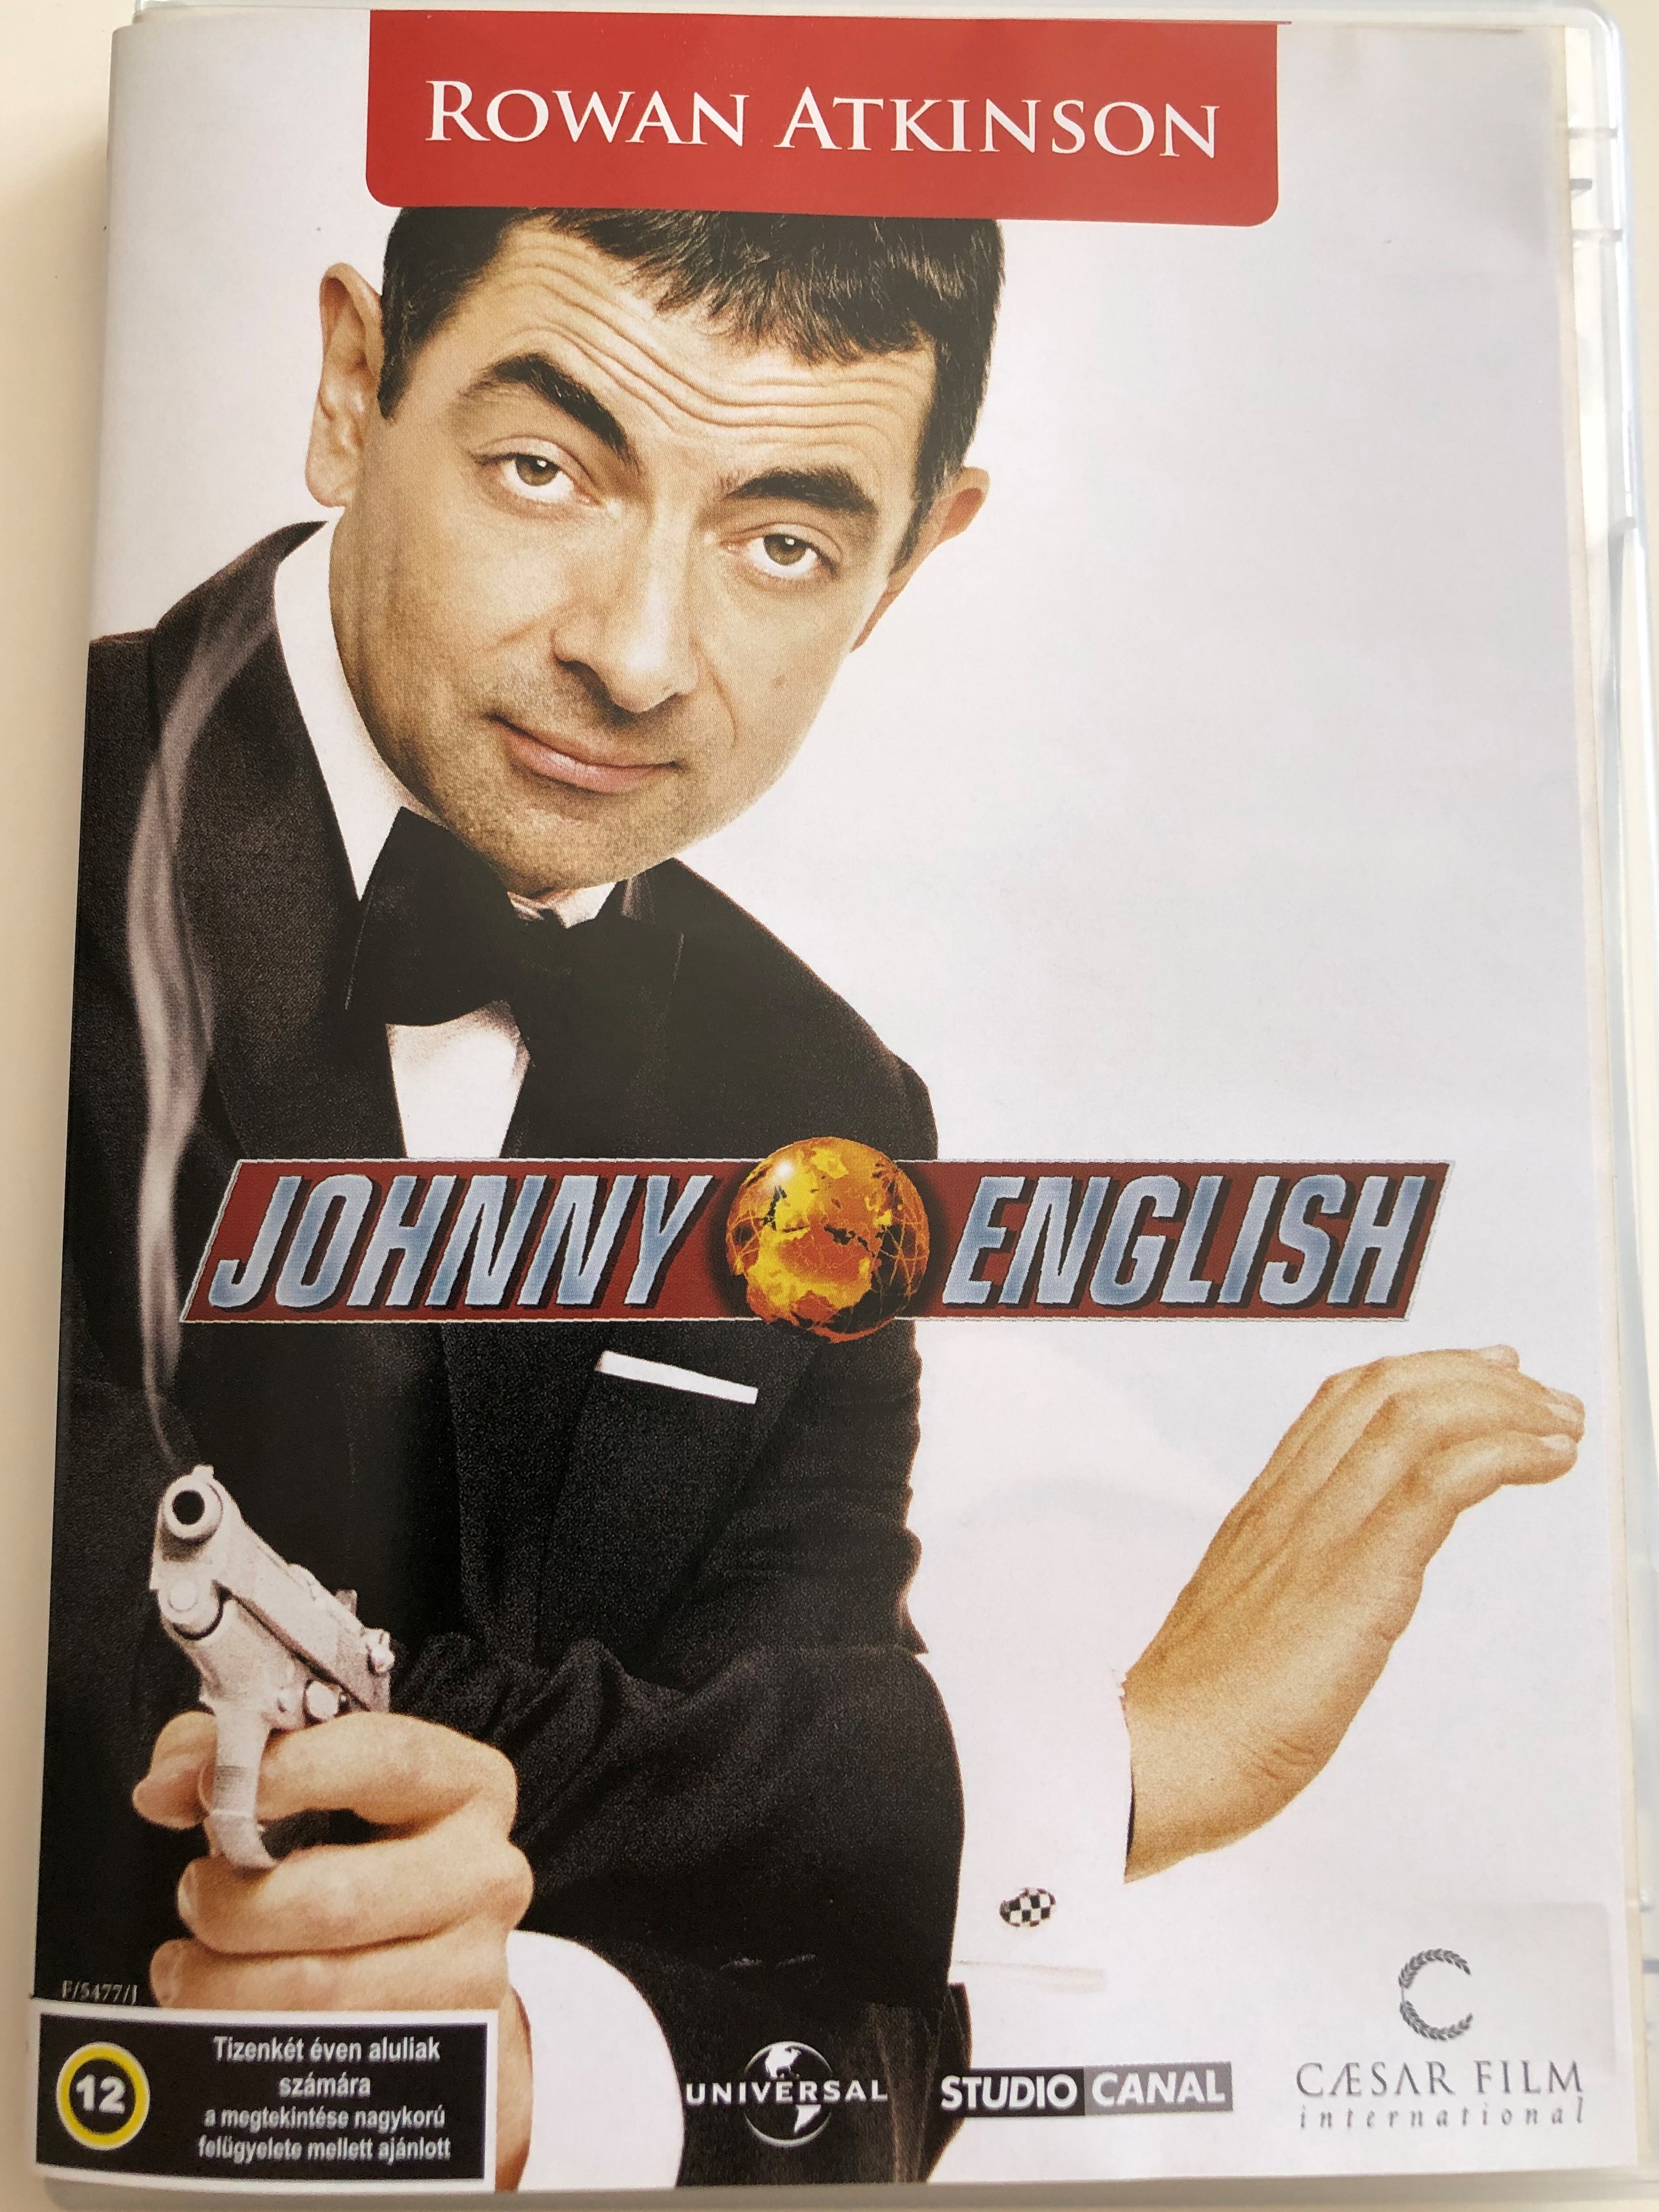 johnny-english-dvd-2003-directed-by-peter-howit-starring-rowan-atkinson-1-.jpg